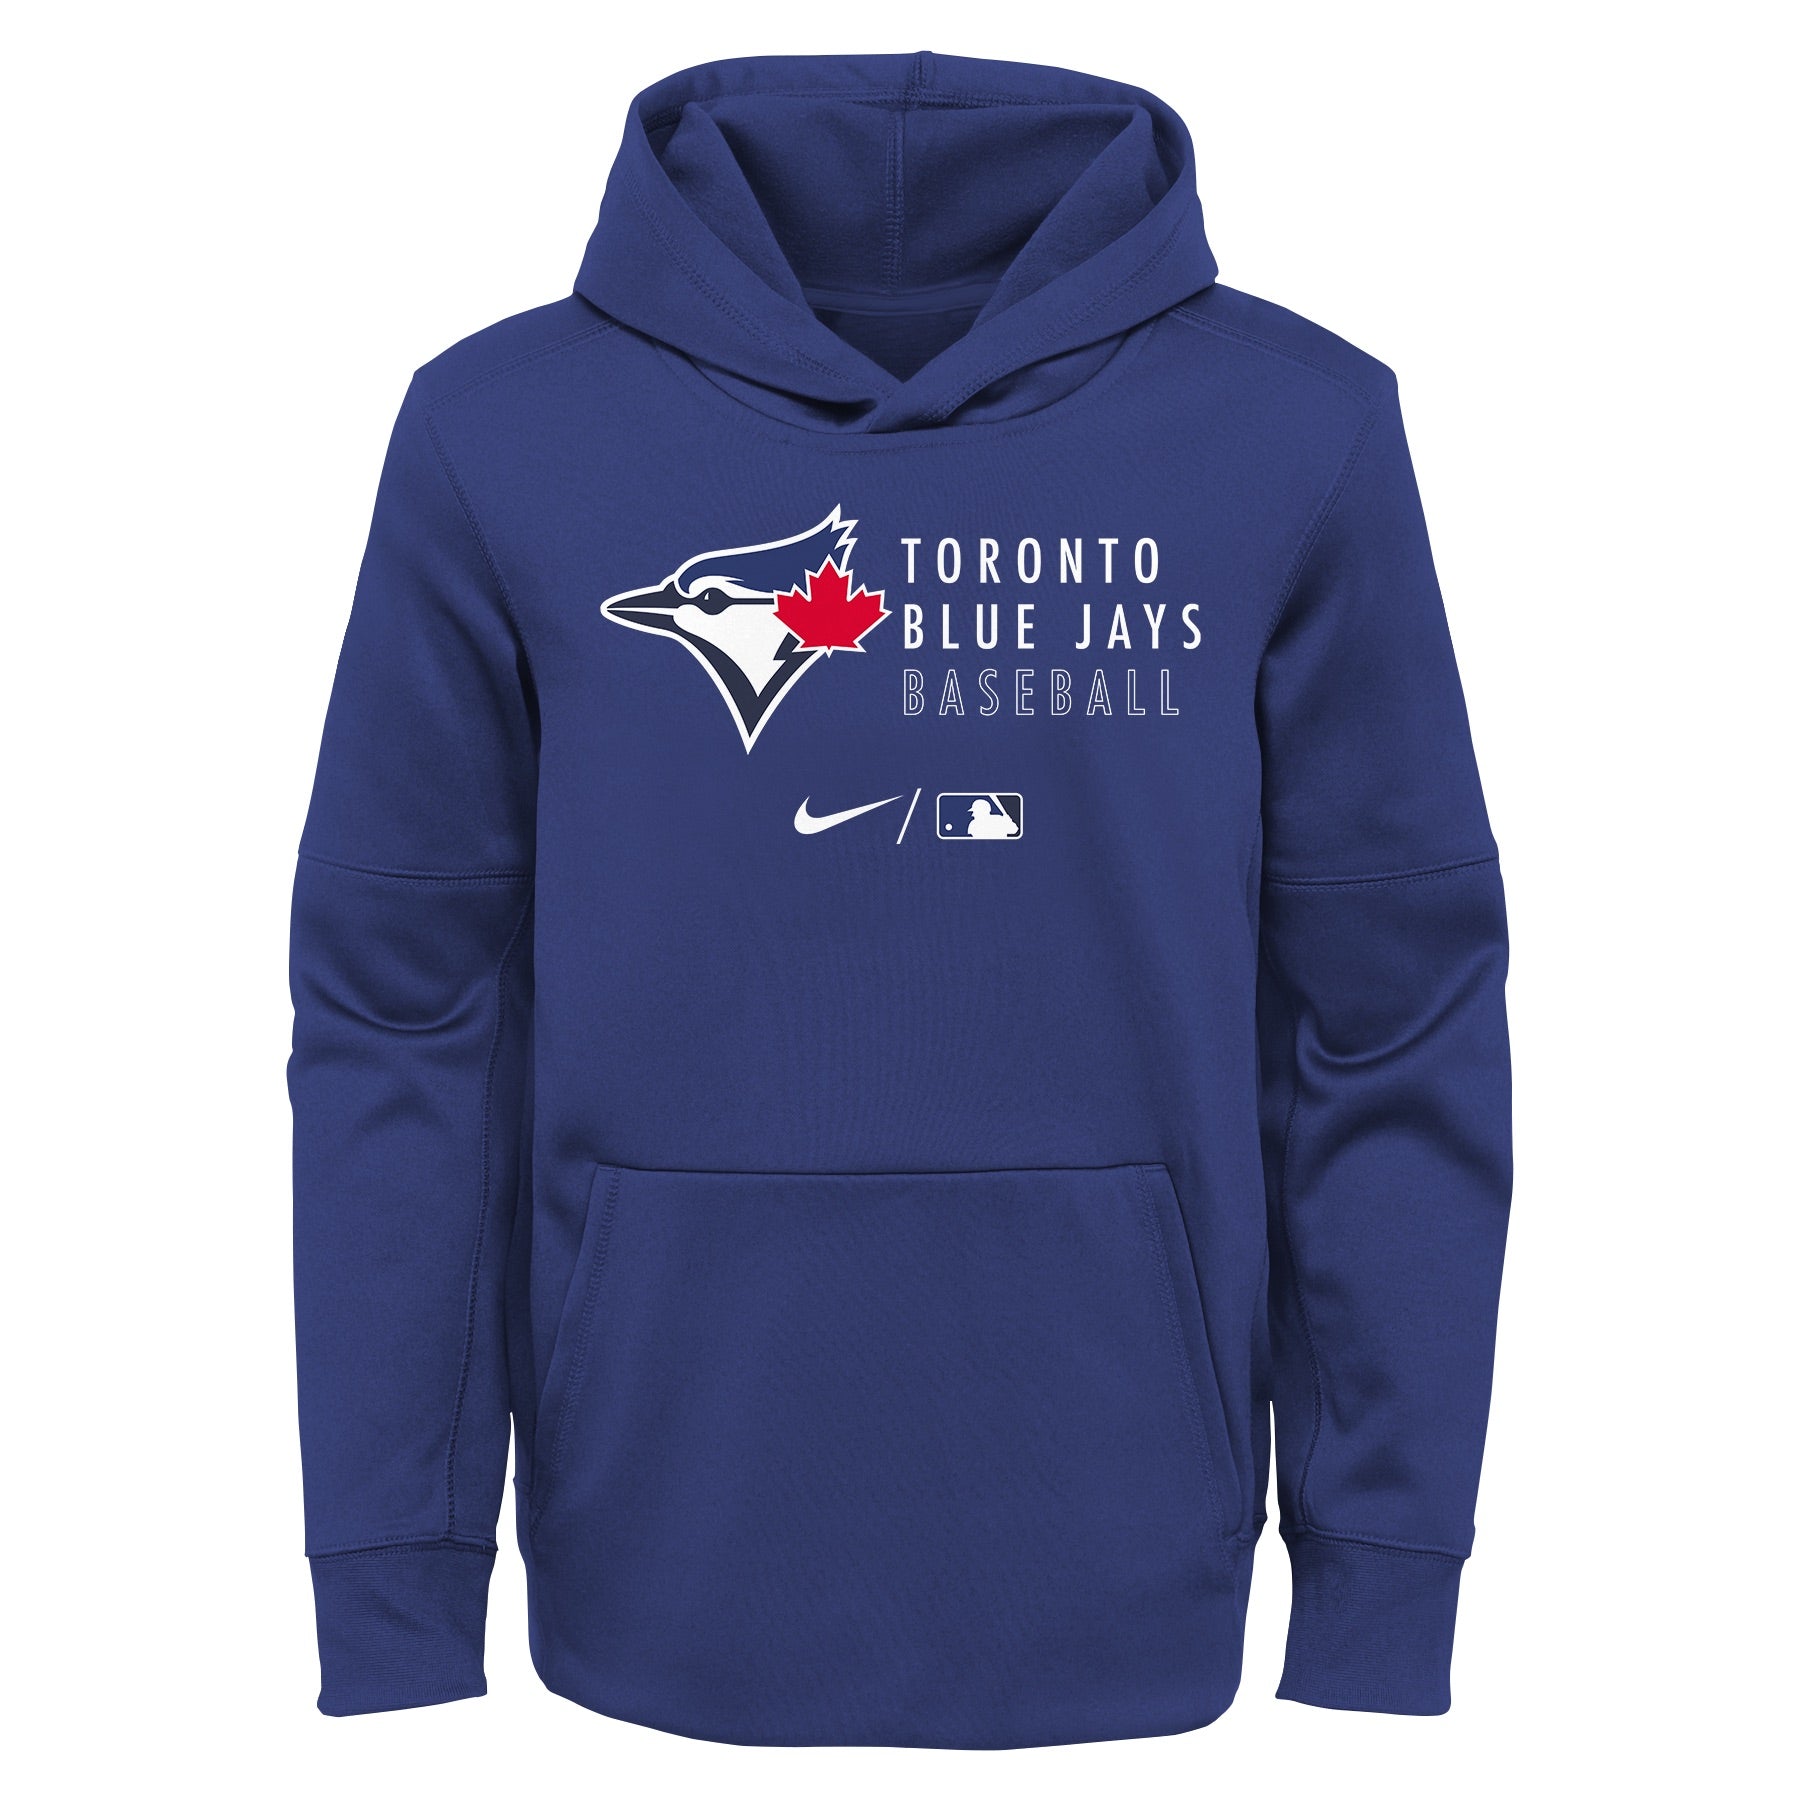 Toronto Blue Jays Nike Official Replica Alternate Jersey - Youth